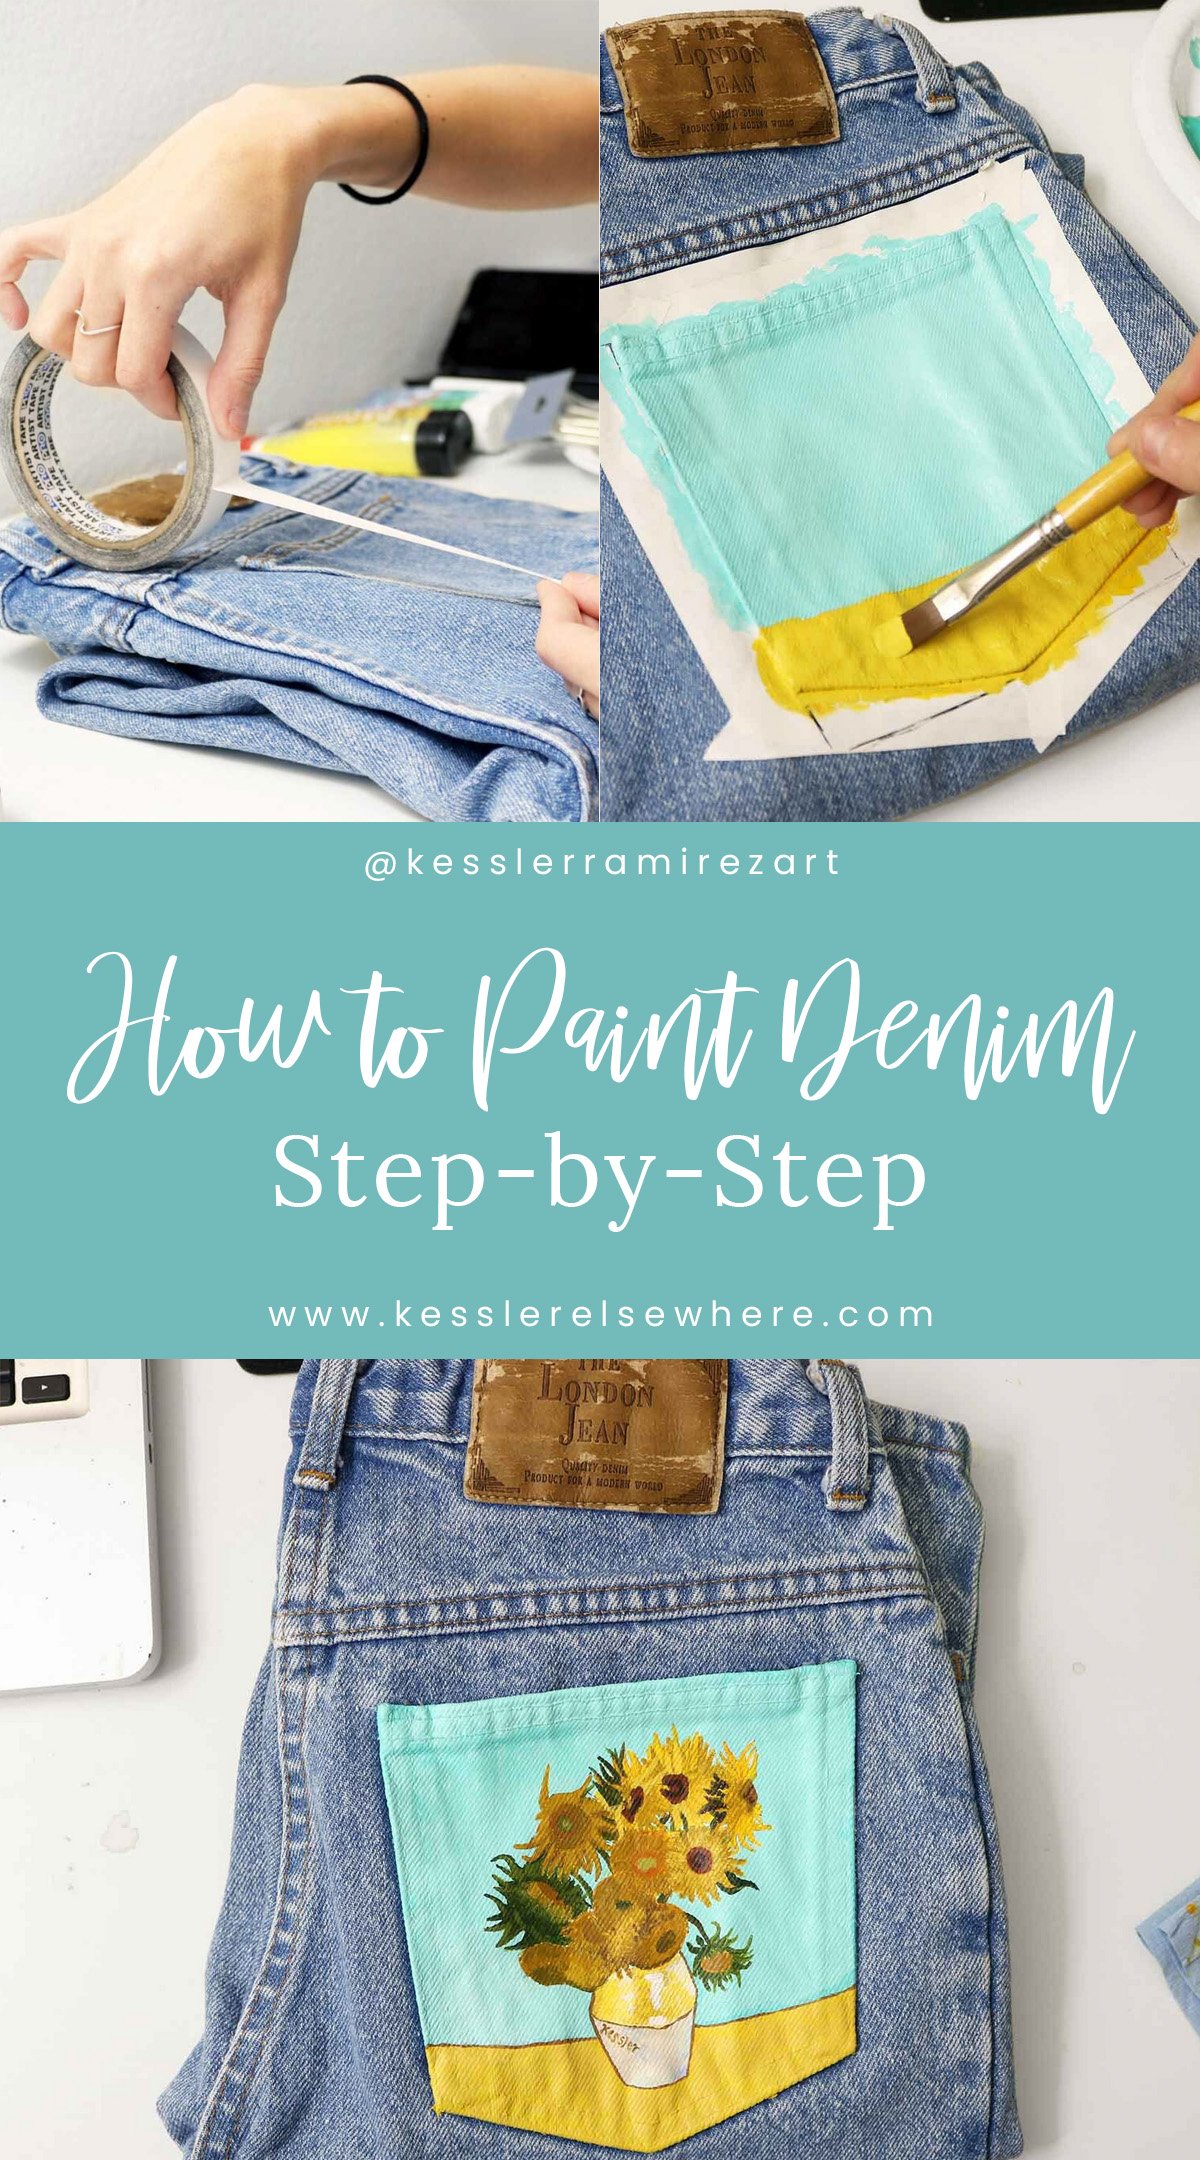 How to (re)dye Your Jeans : 4 Steps - Instructables